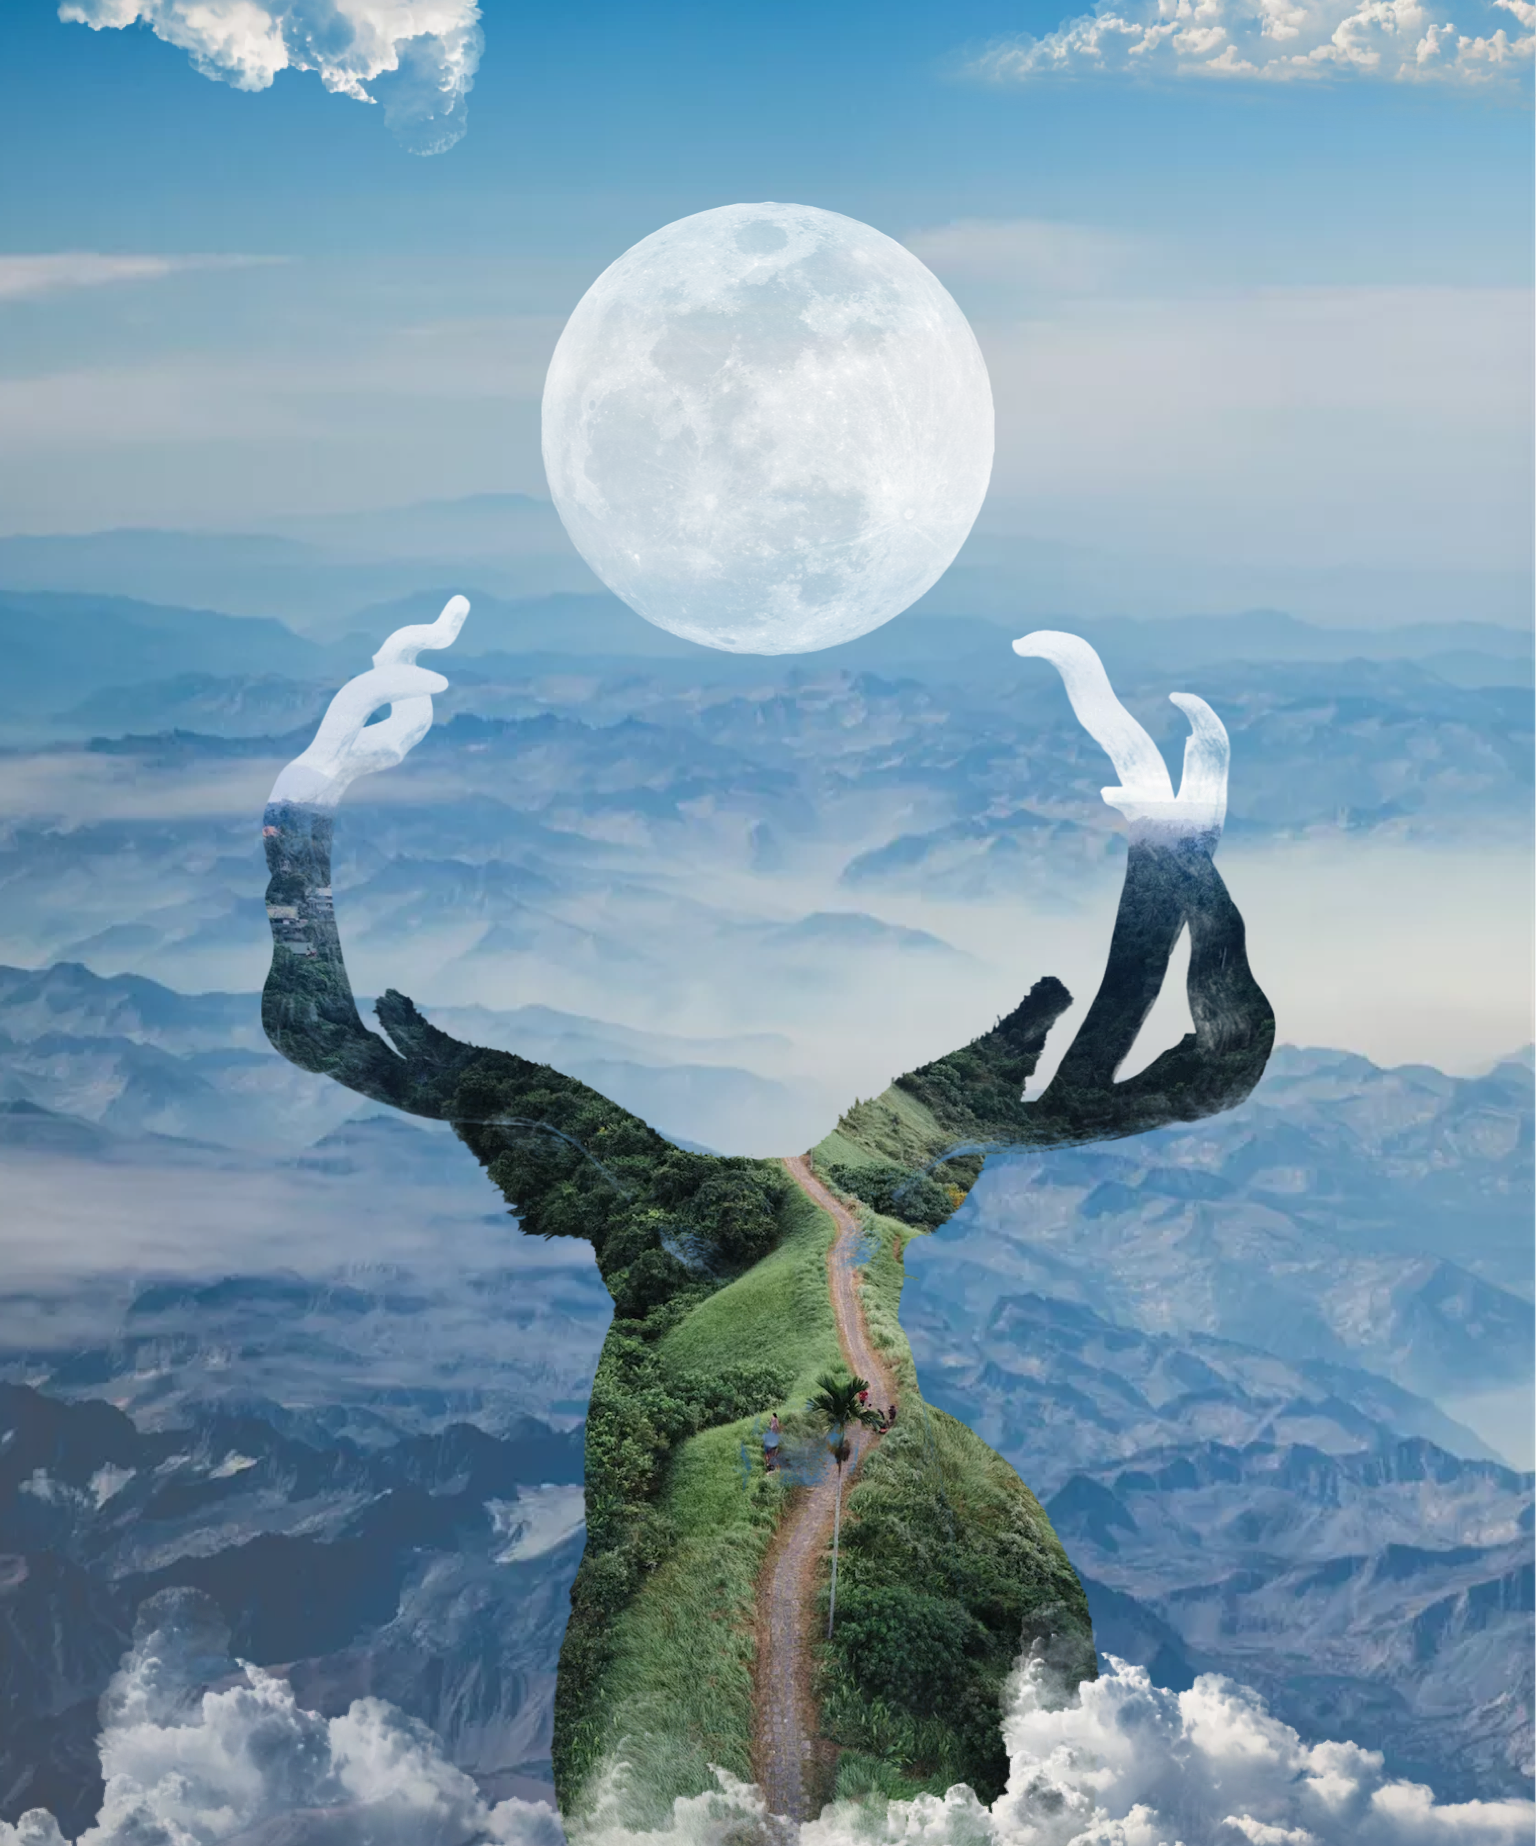 A Surreal Image Of A Person Reaching For The Moon Template